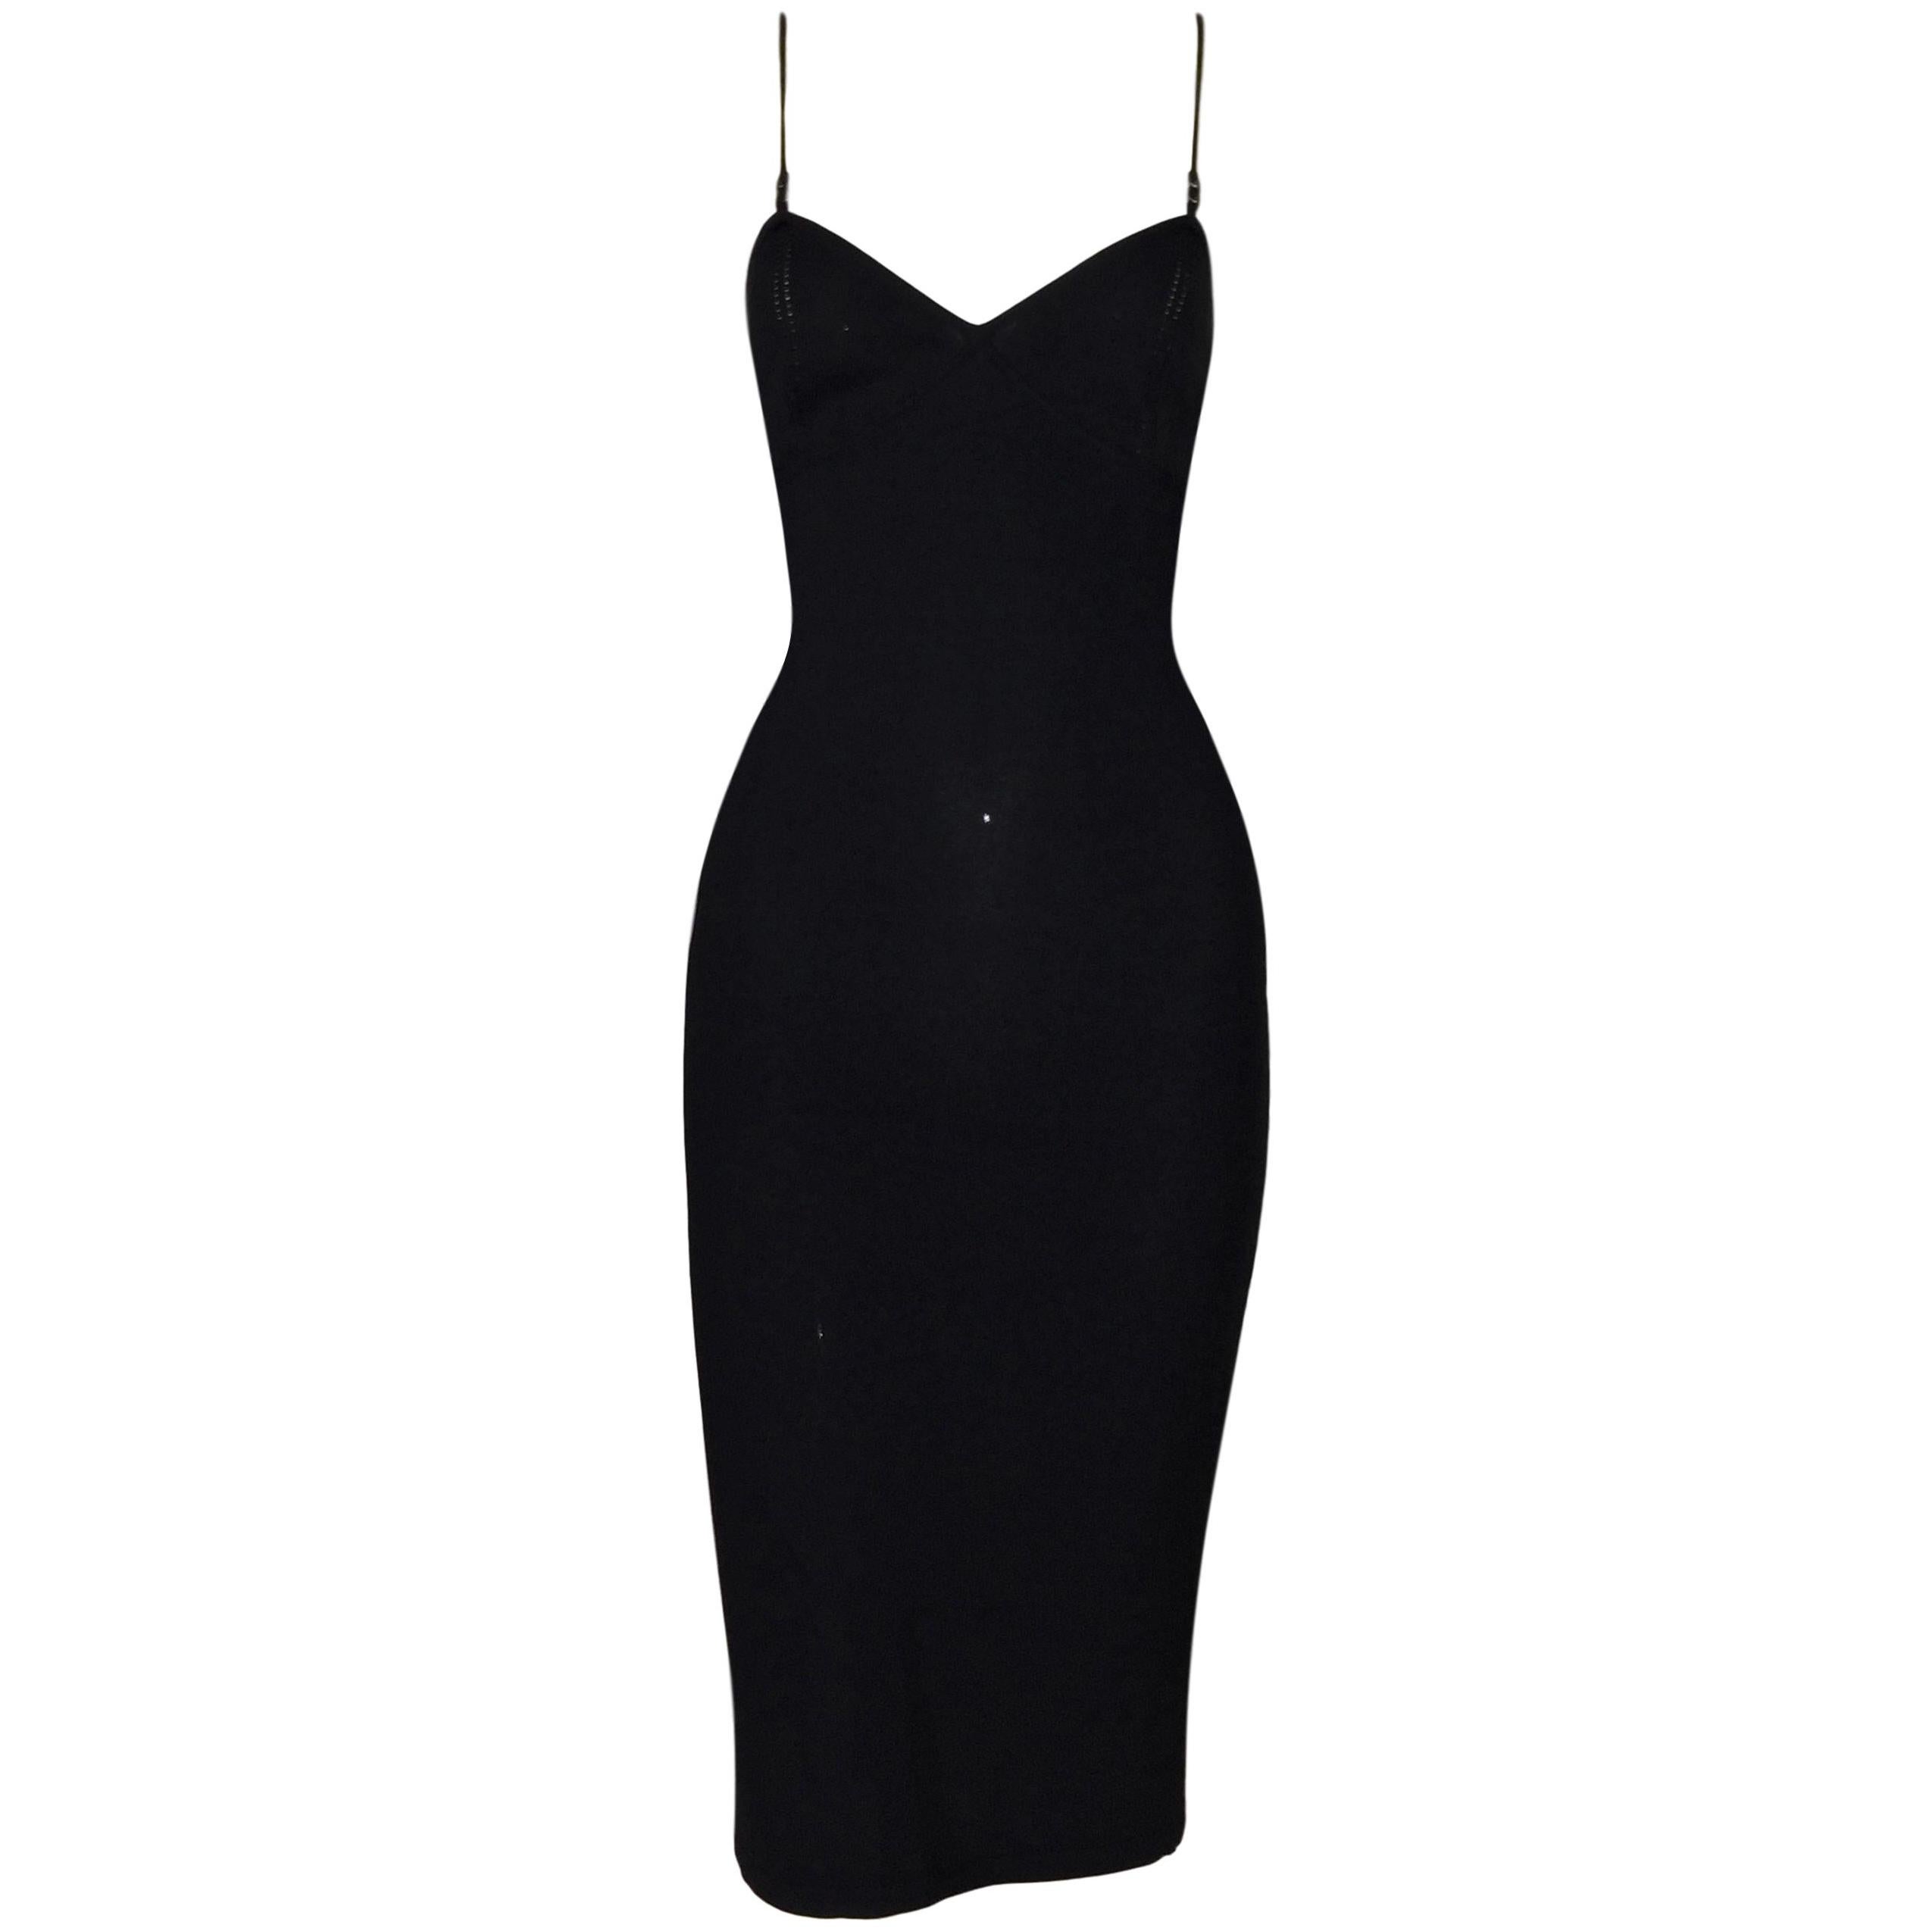 1999 Gucci by Tom Ford Plunging Black Slinky Bodycon Knit Dress M at ...